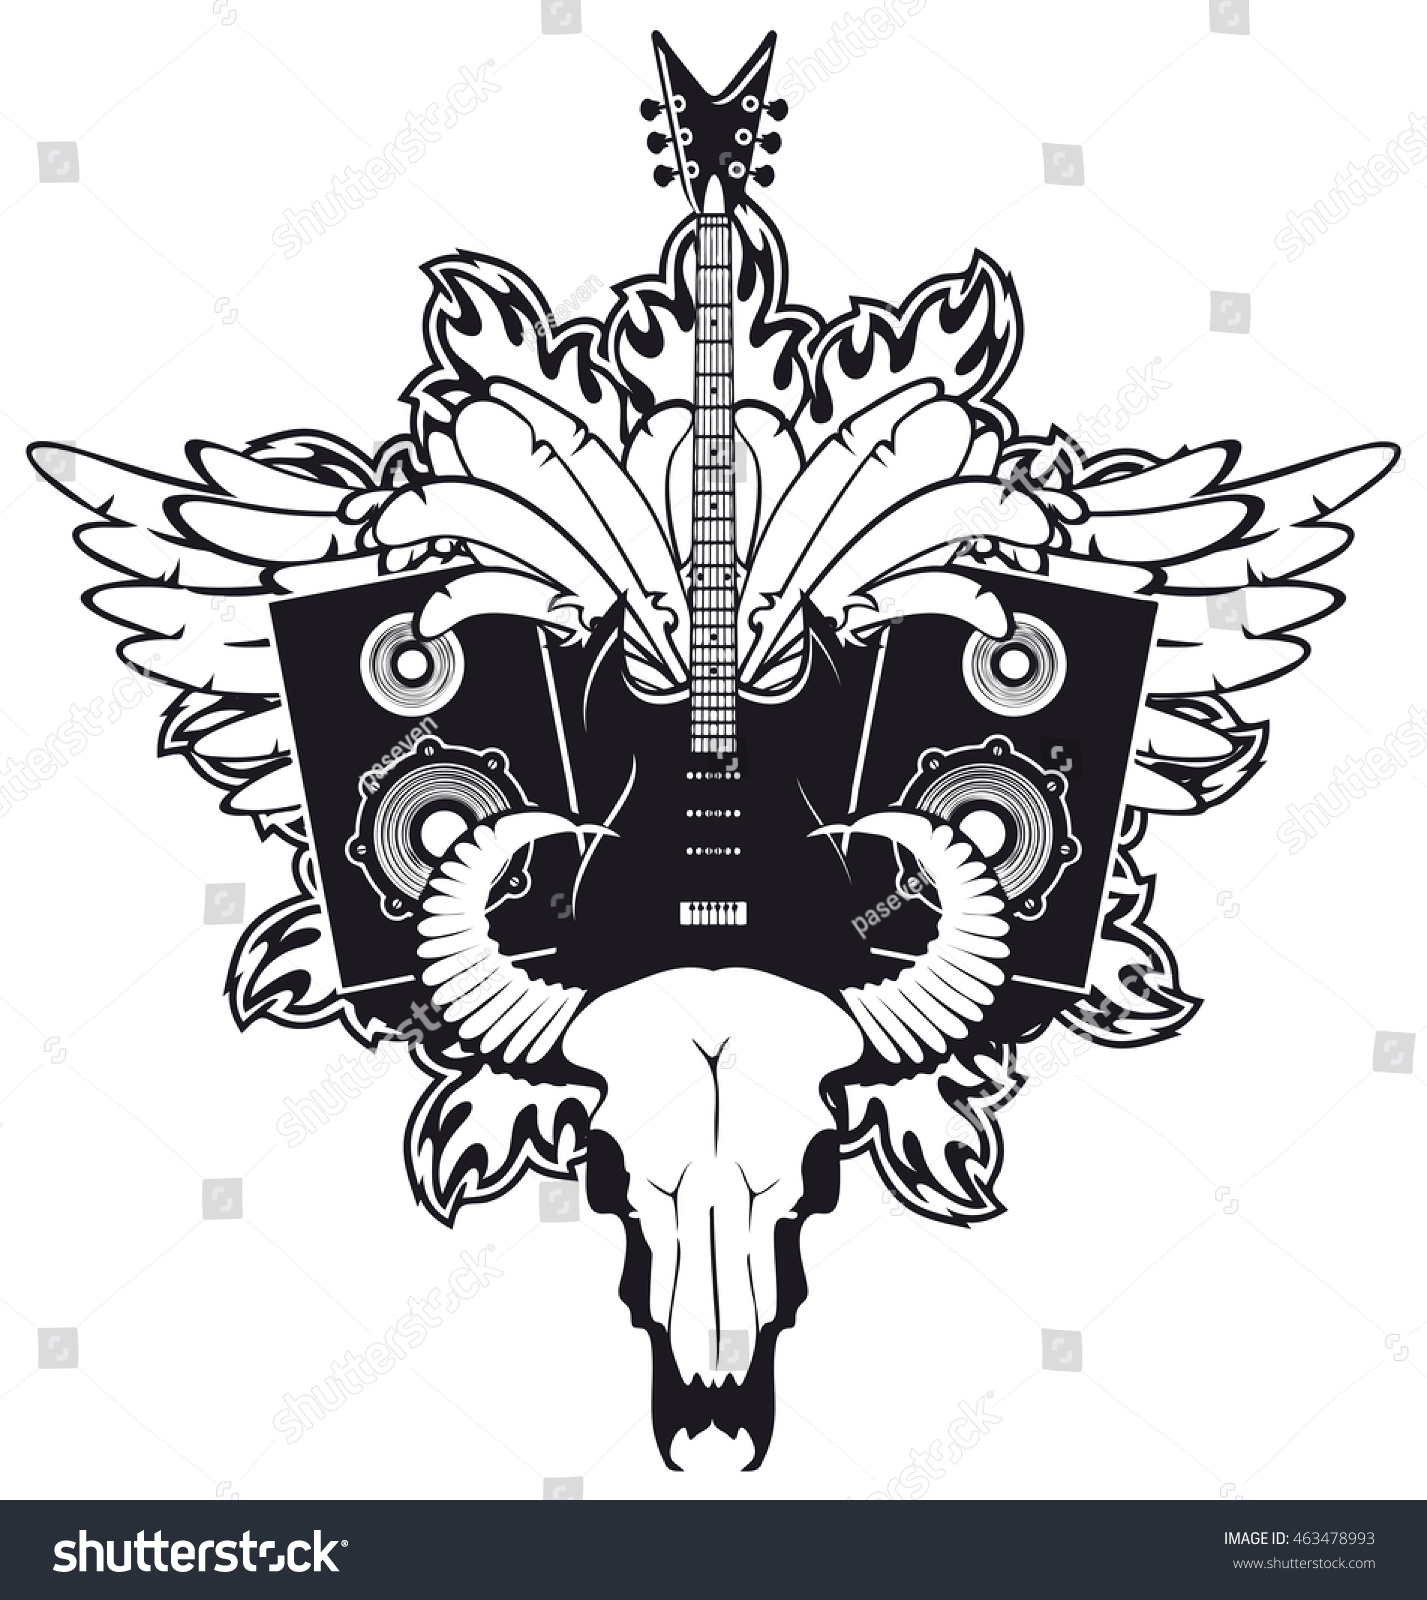 Emblem With An Electric Guitar Wings Speakers Royalty Free Stock Vector 463478993